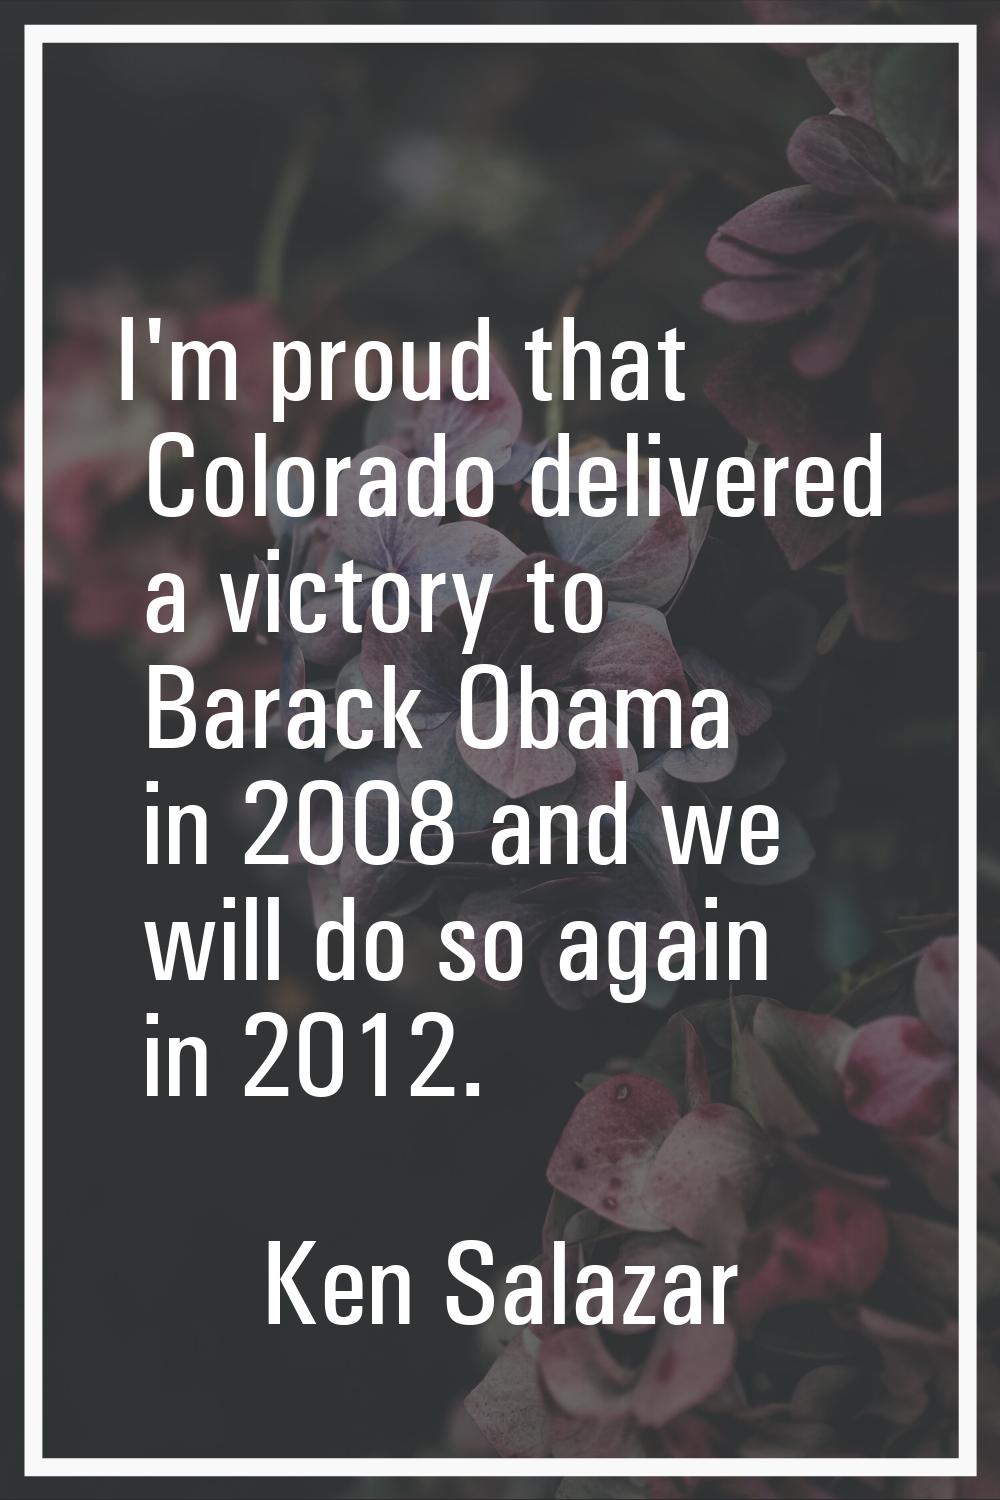 I'm proud that Colorado delivered a victory to Barack Obama in 2008 and we will do so again in 2012